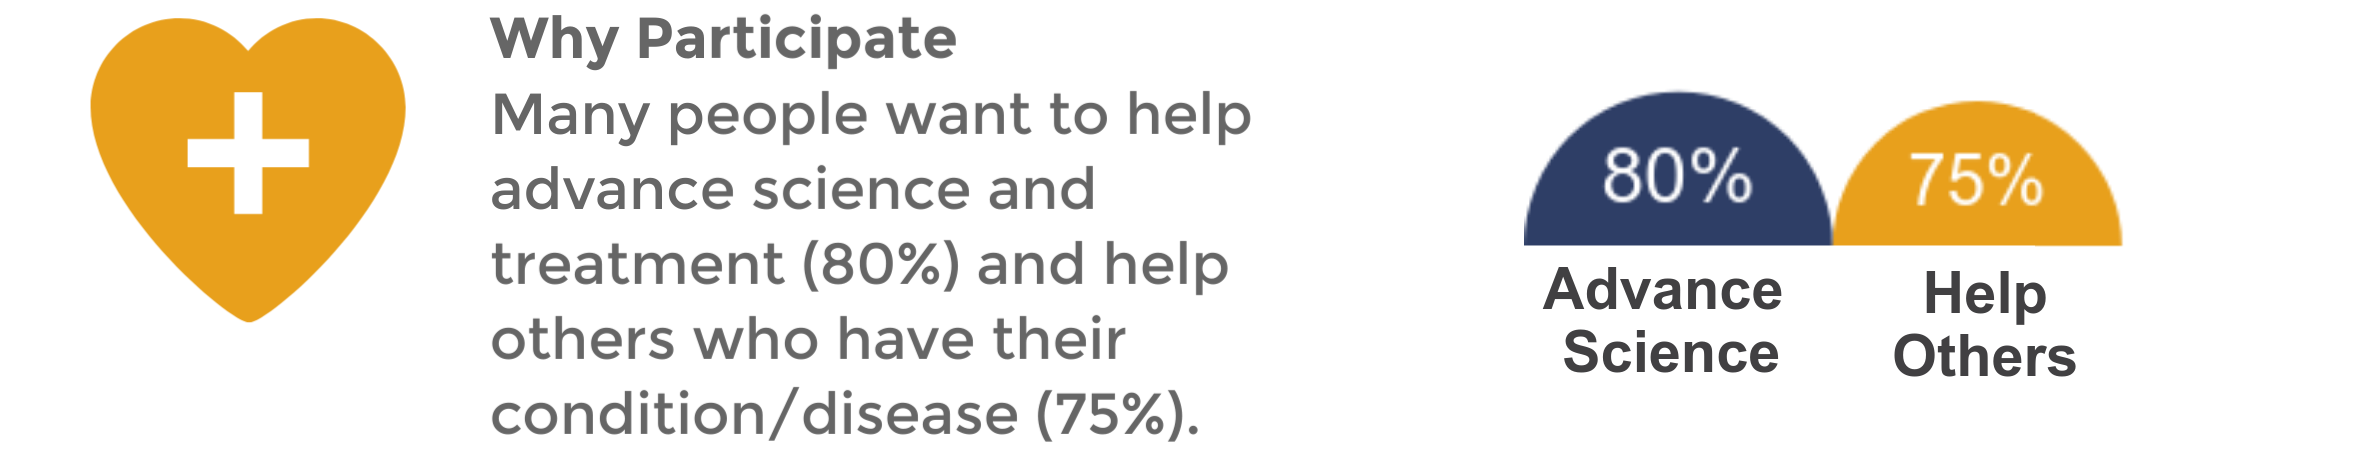 Why Participate: Many people want to help advance science (80%) and help others who have their condition/disease (75%).